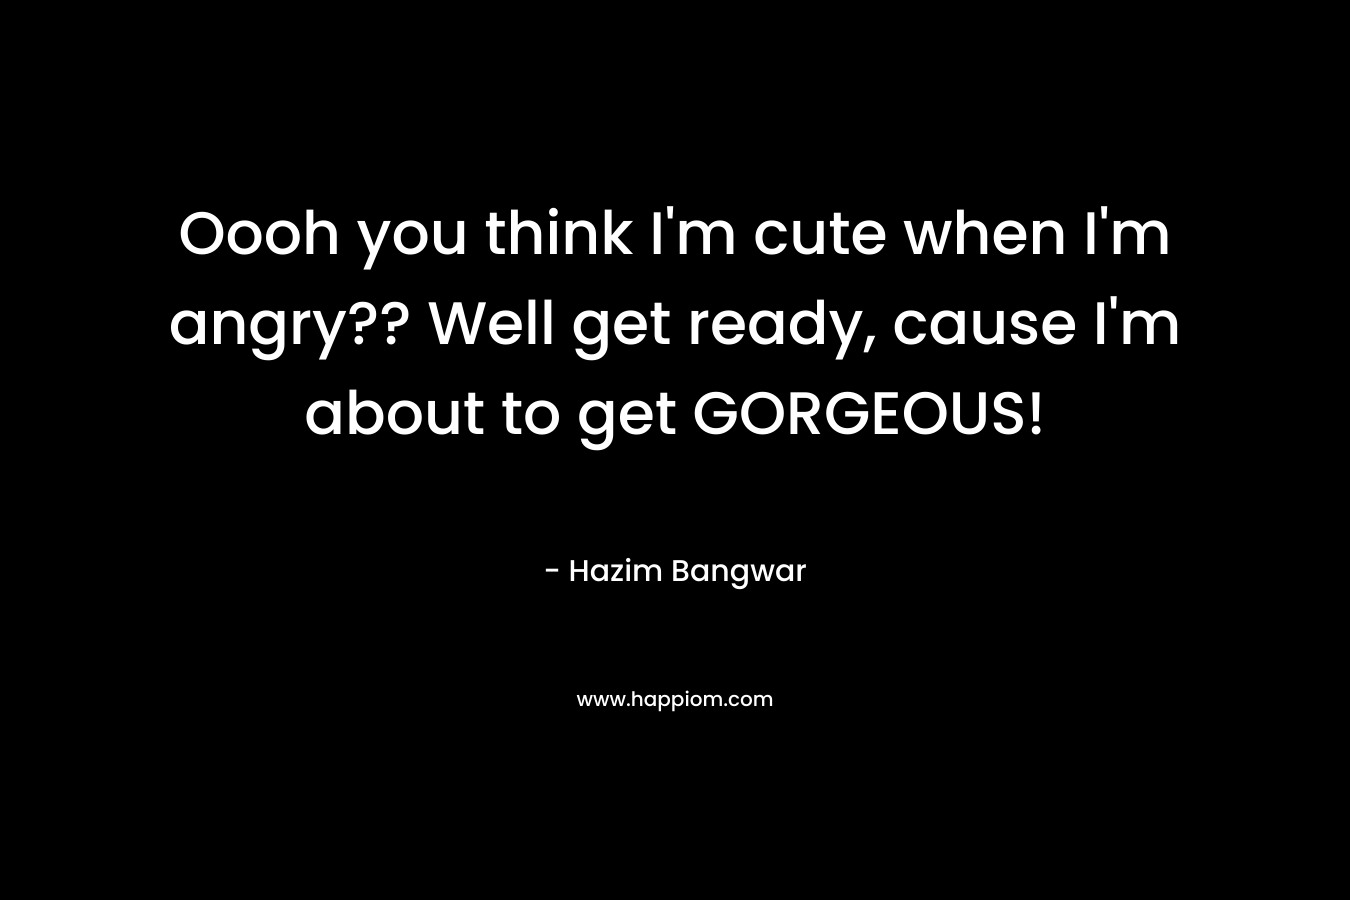 Oooh you think I'm cute when I'm angry?? Well get ready, cause I'm about to get GORGEOUS!